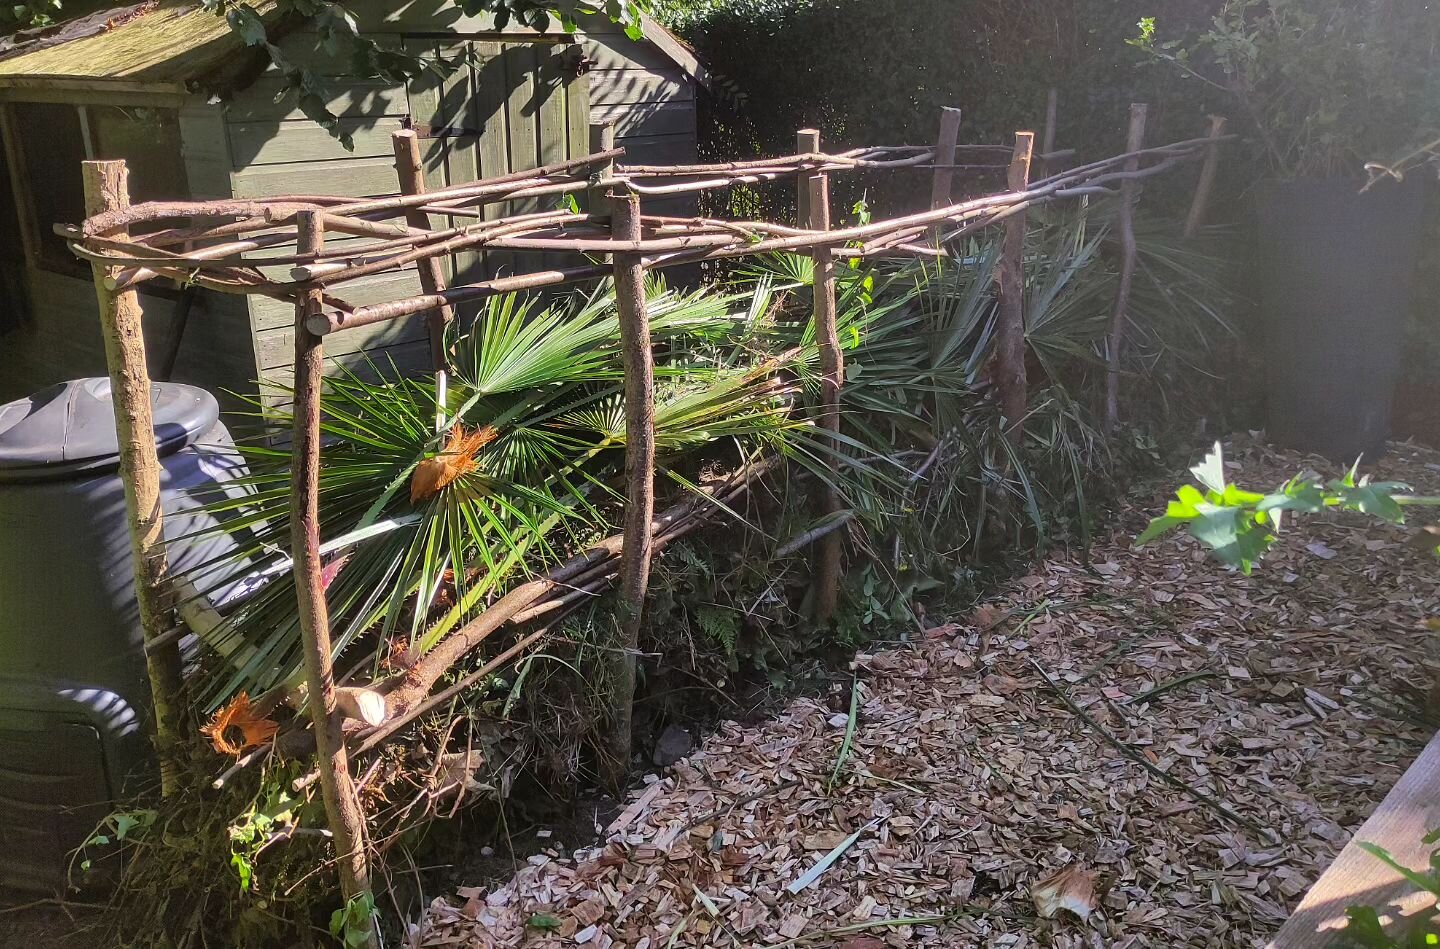 Todays dead hedge complete with fan palm leaves which is a first for me 😂 plenty of space left for the owners to fill up with hedge clippings and prunings.
.
.
#deadhedge #wildlifegardening #wildlifehabitat #invertebrates #ecogarden